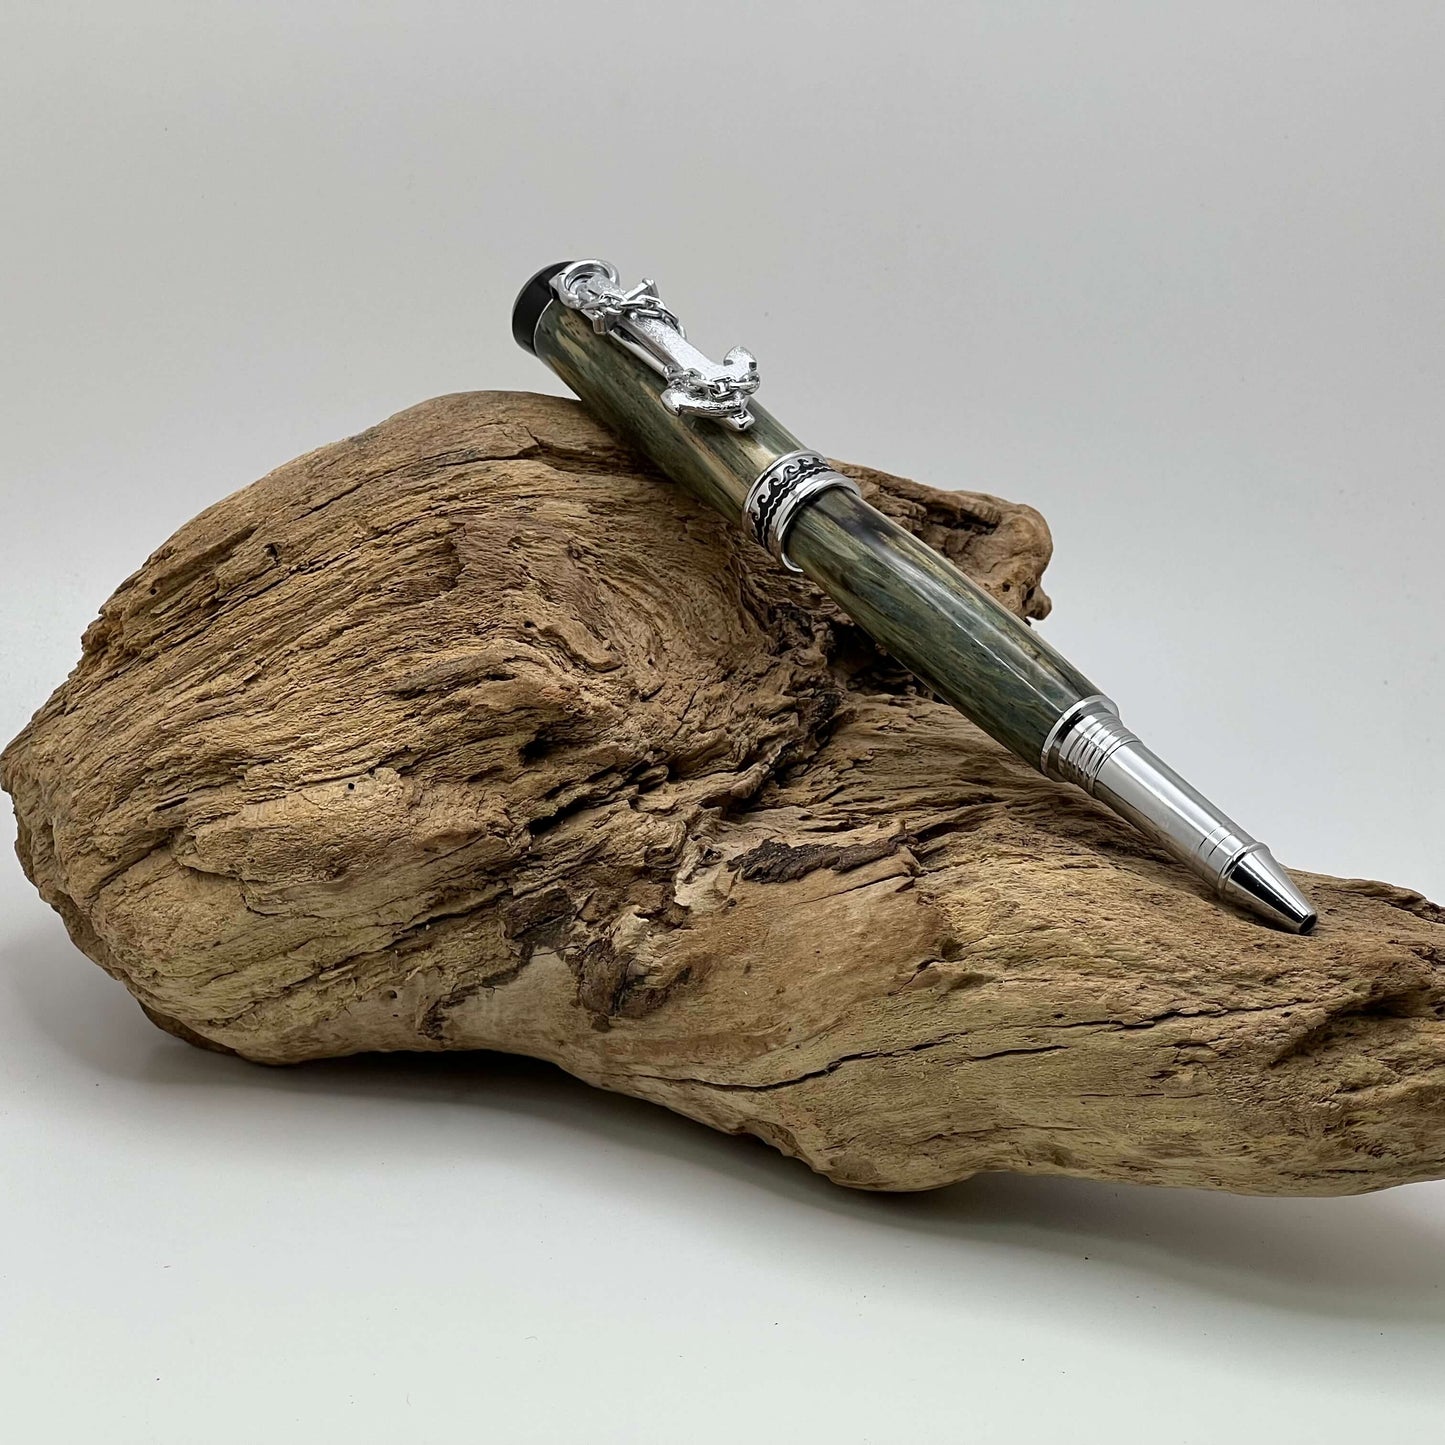 The Pamlico Voyager Rollerball Pen